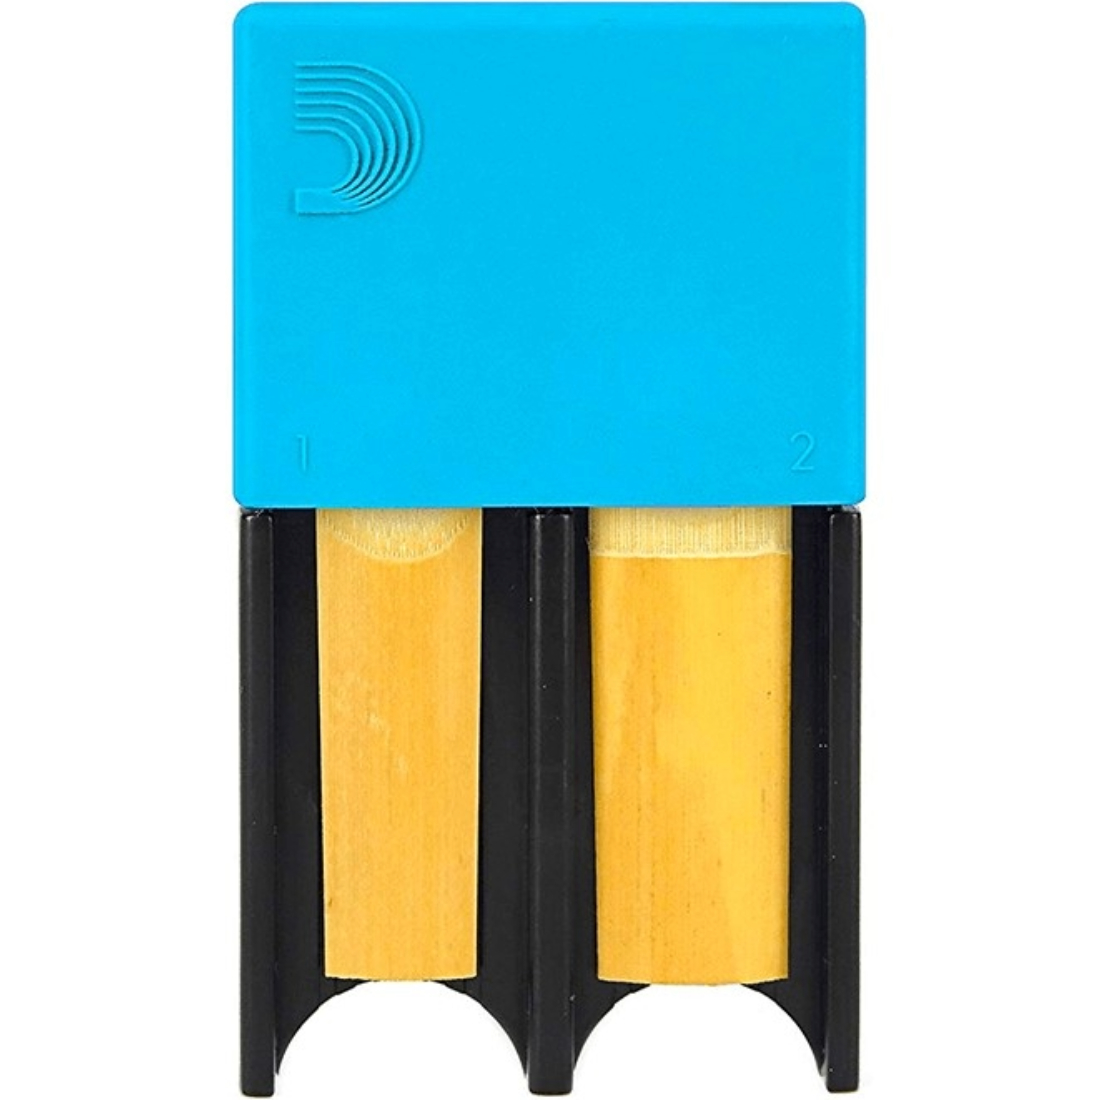 Black and blue D'addario reed guard